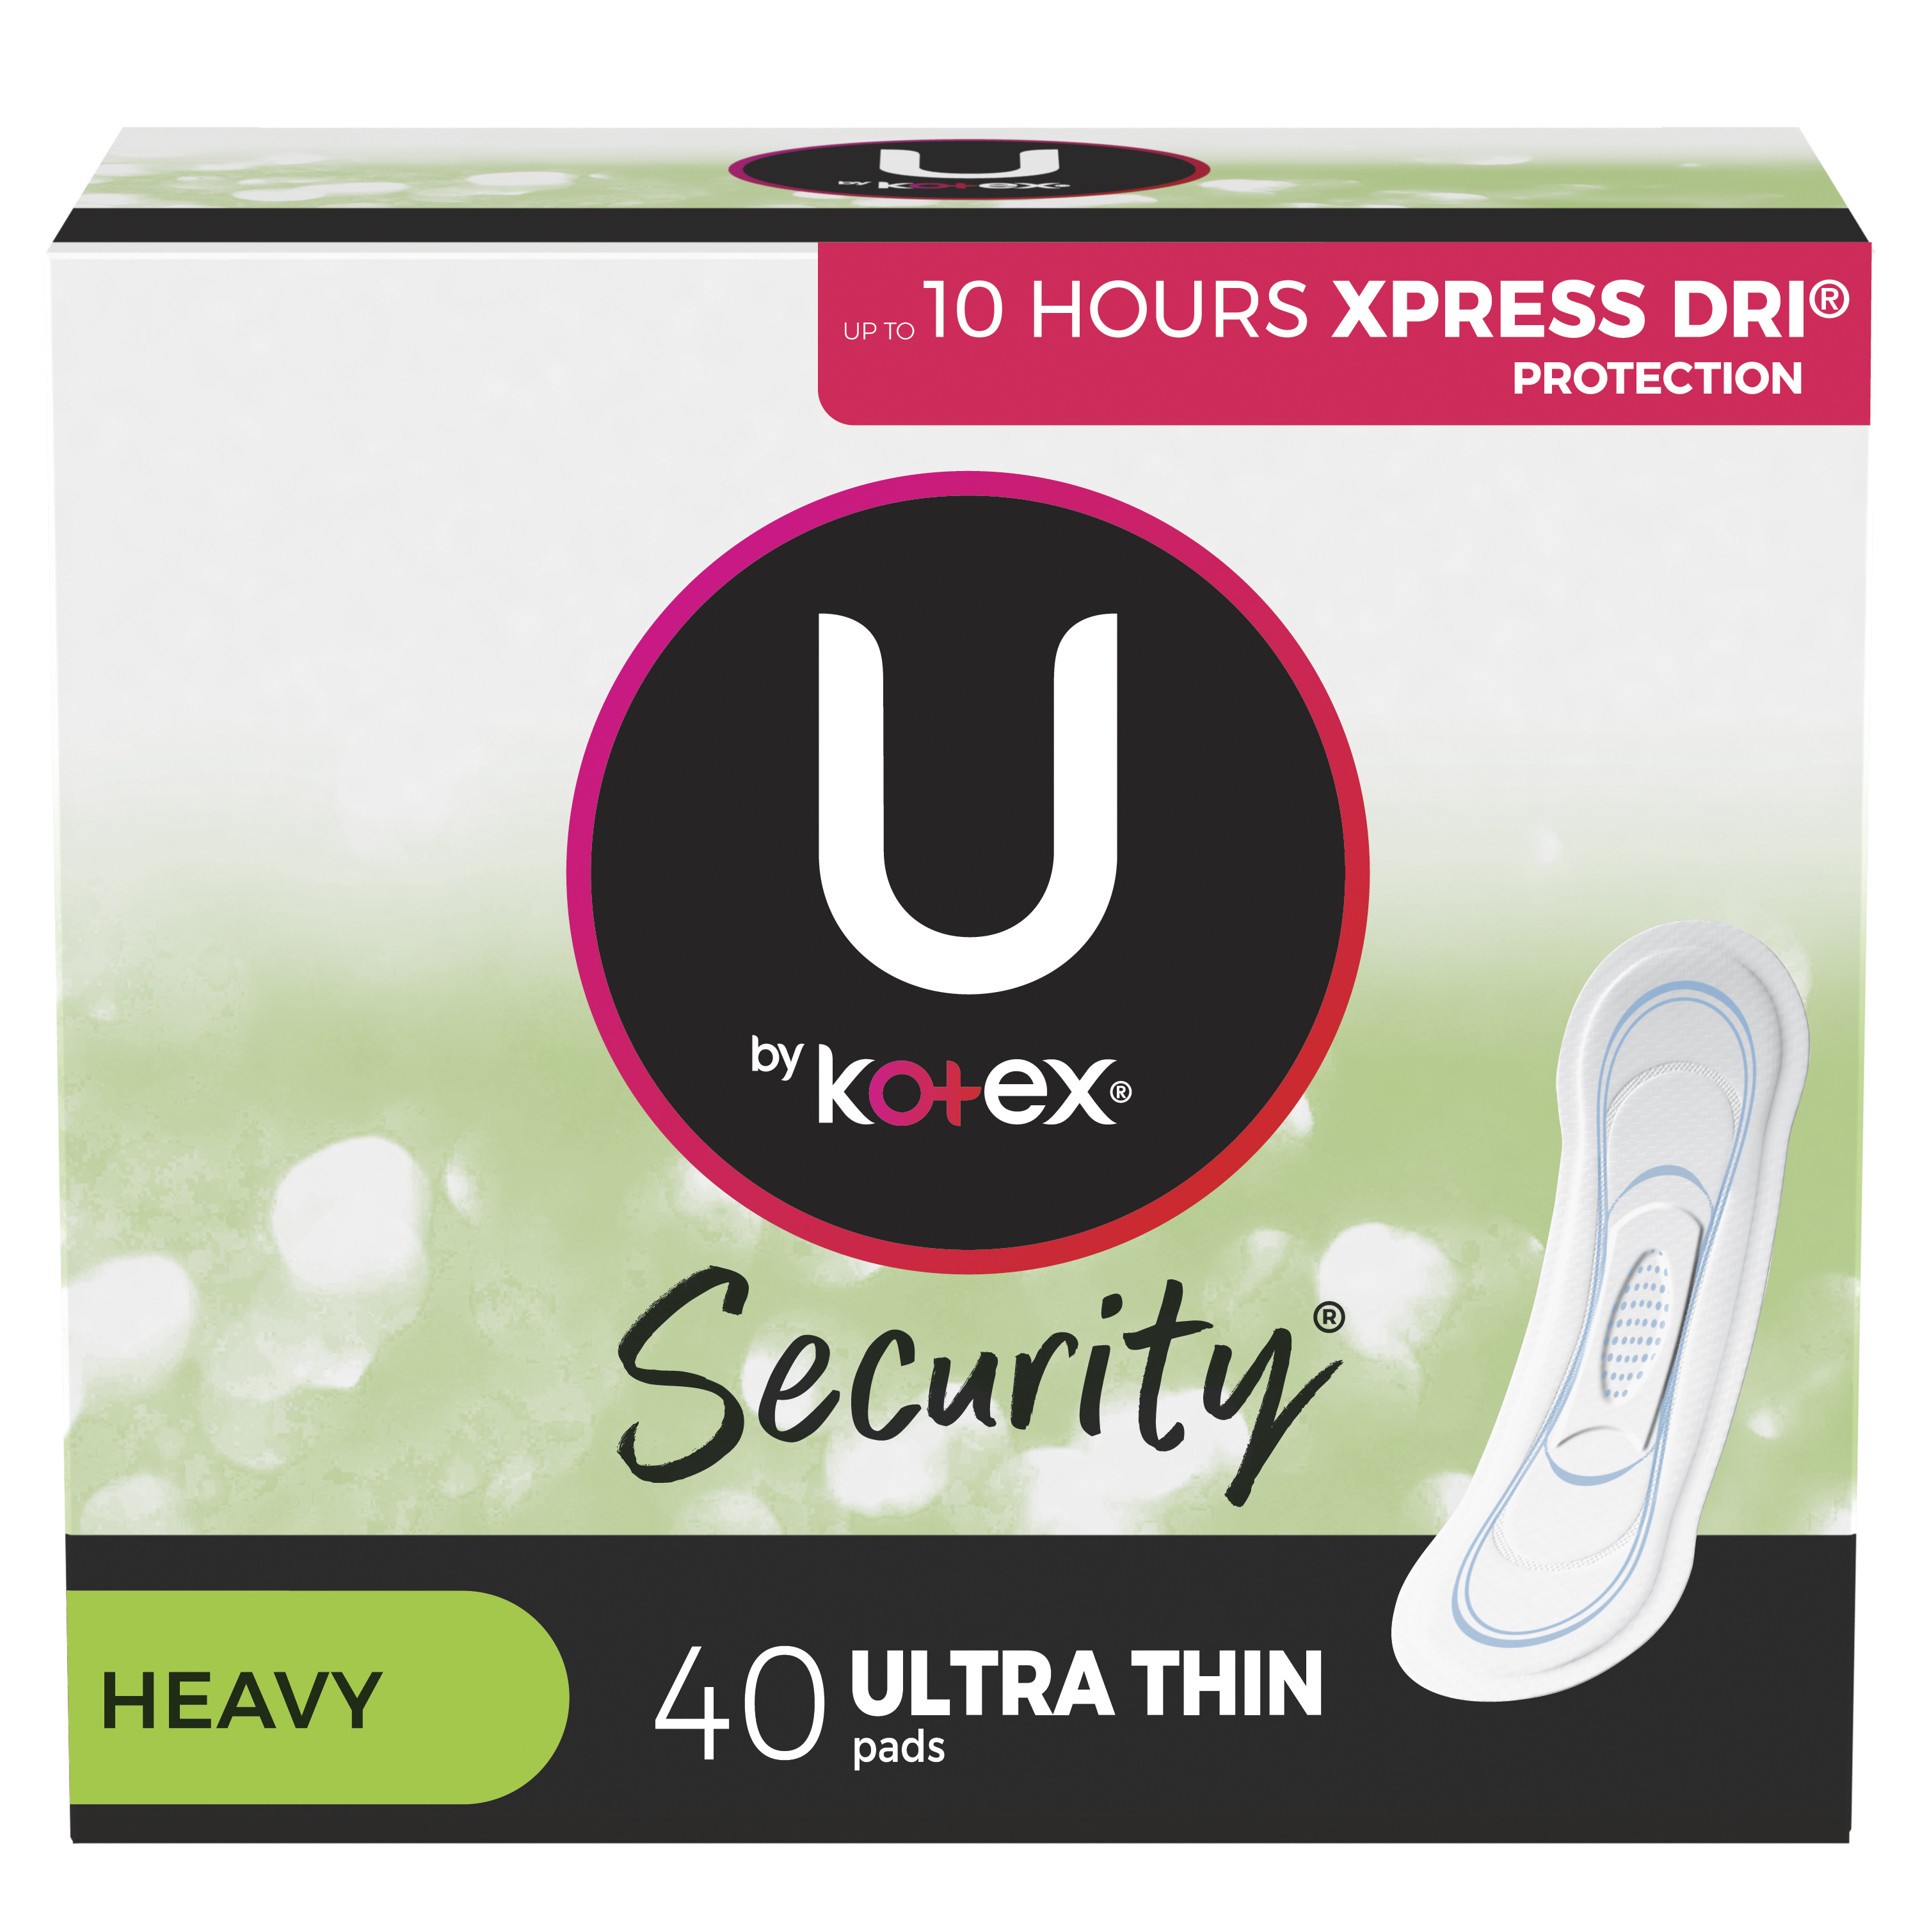 slide 1 of 16, U by Kotex Security Heavy Ultra Thin Pads 40 ea, 40 ct